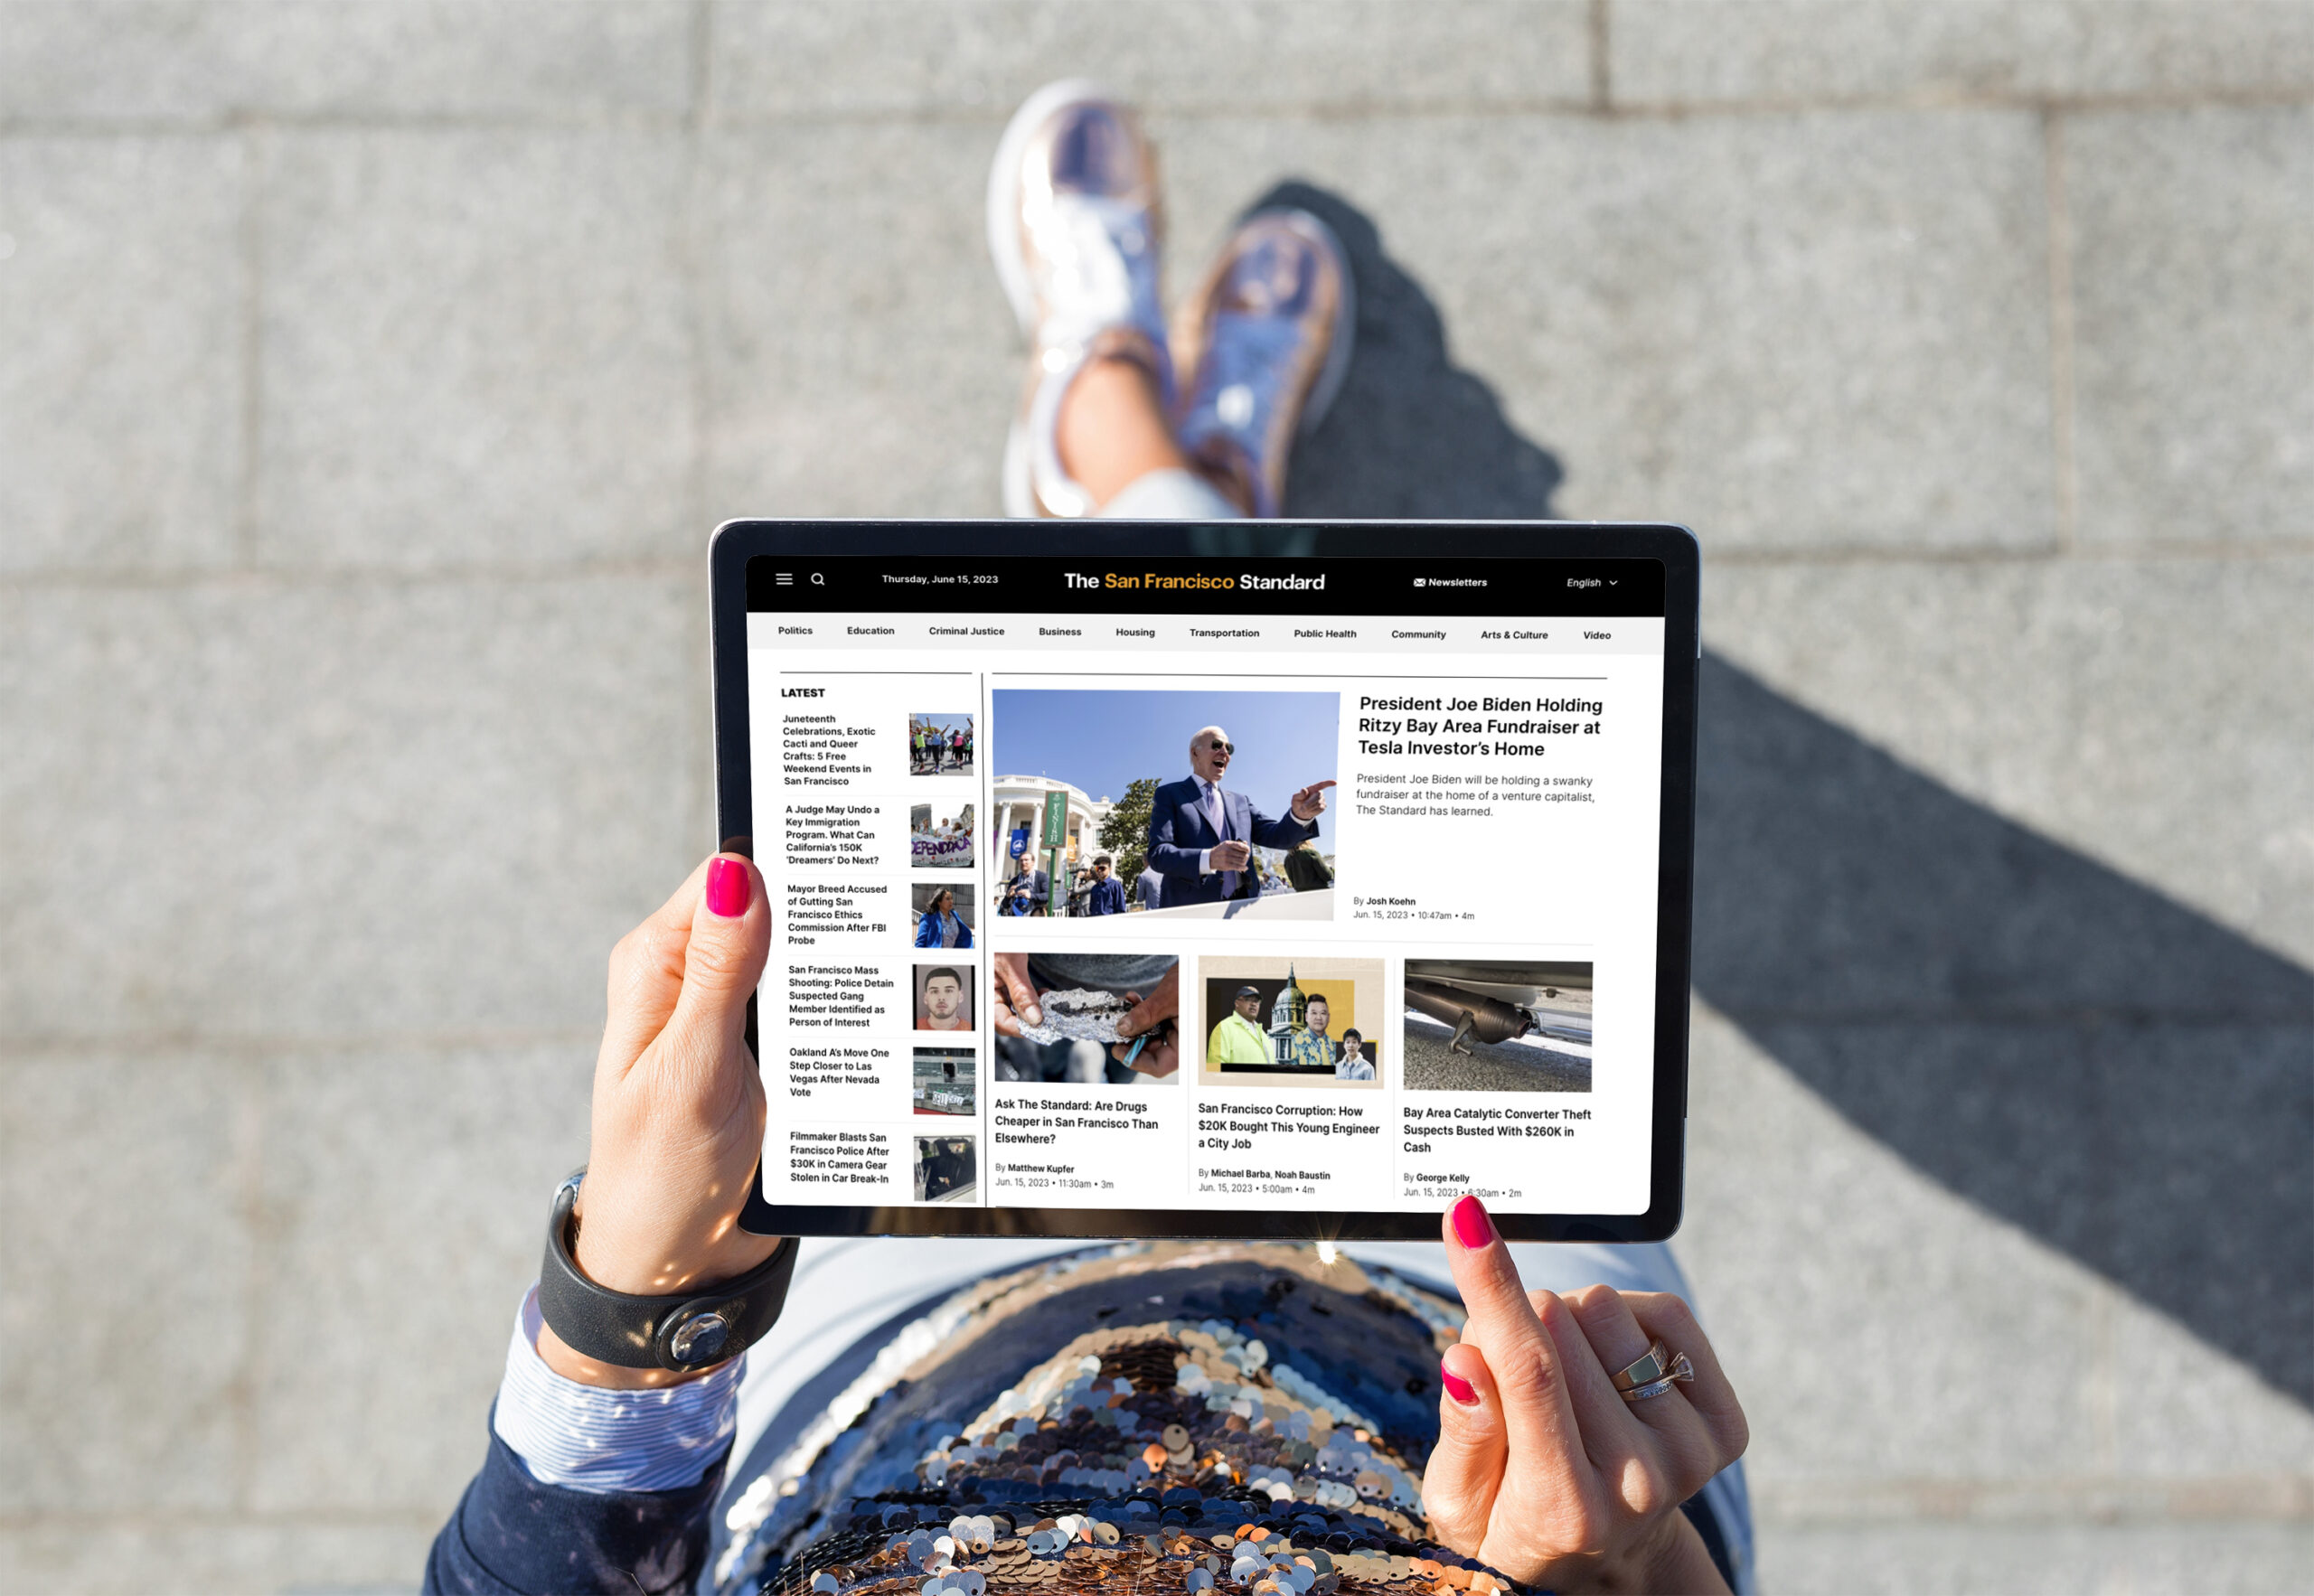 Take Our Reader Survey, and You Could Win an iPad